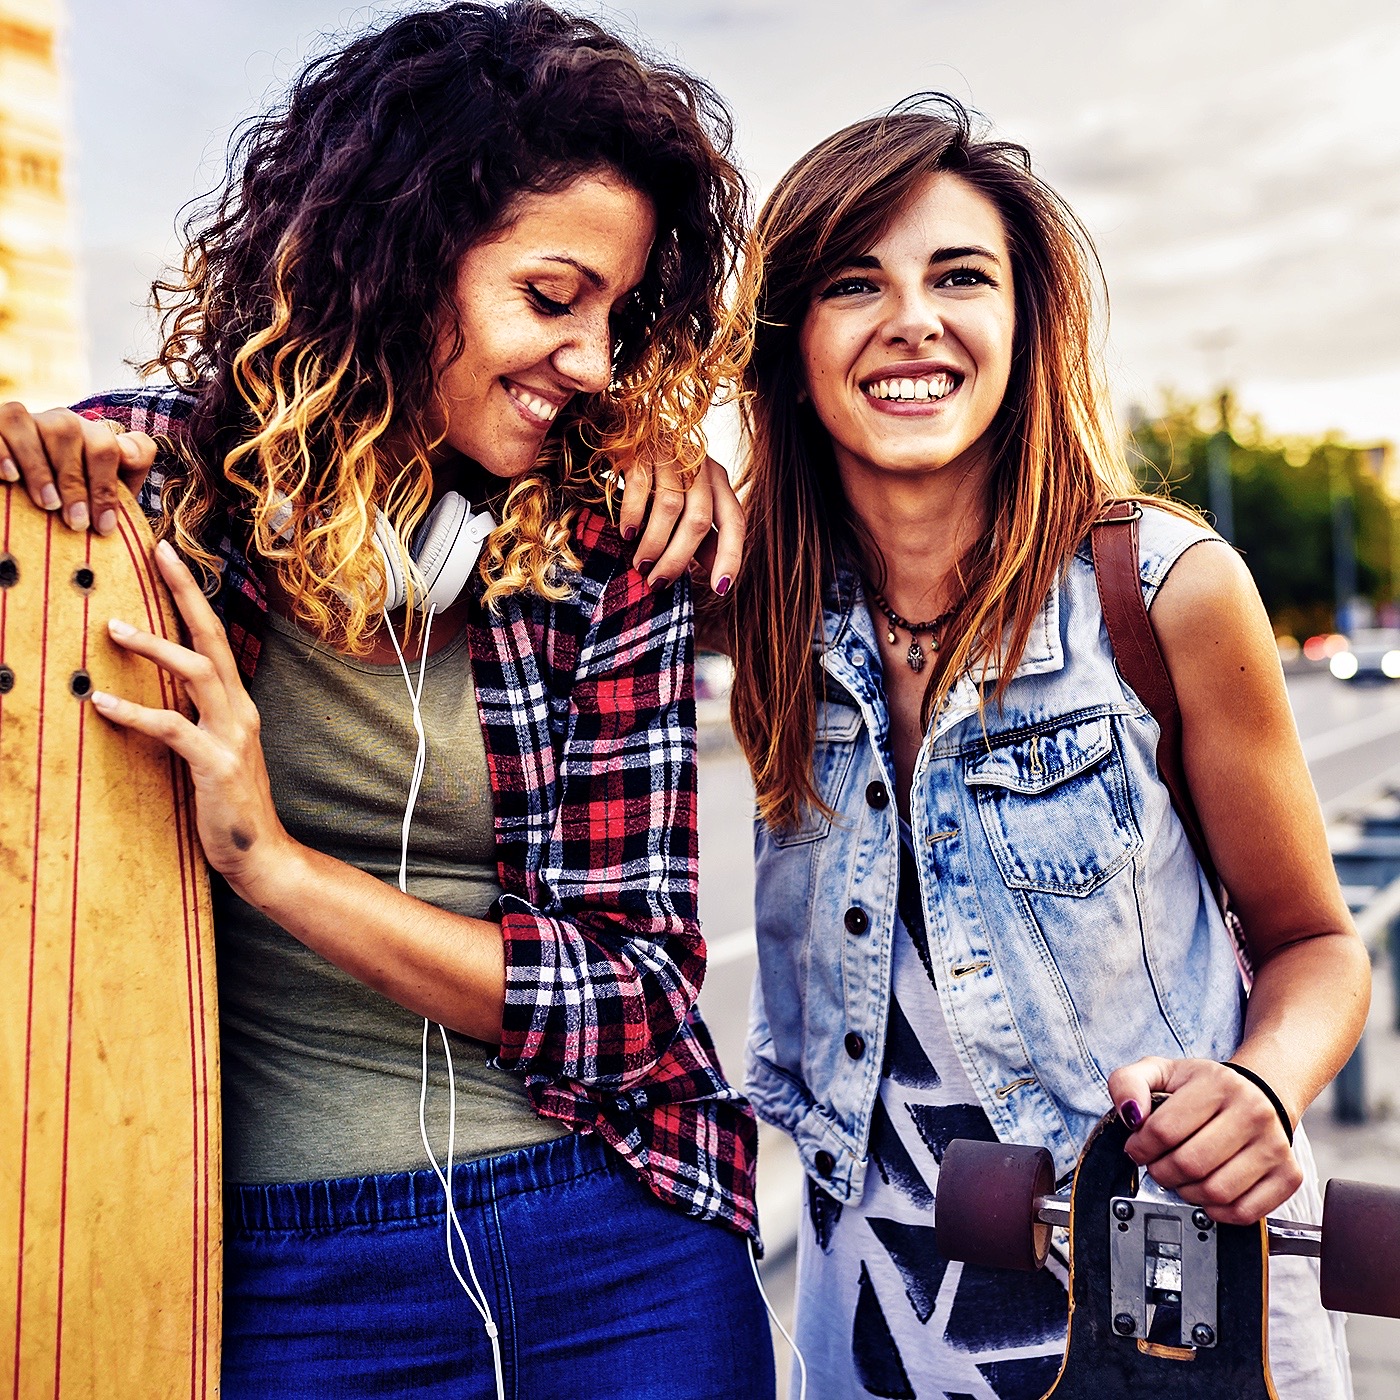 Smiling skateboarding girls standing in the street hanging out, holding longboards